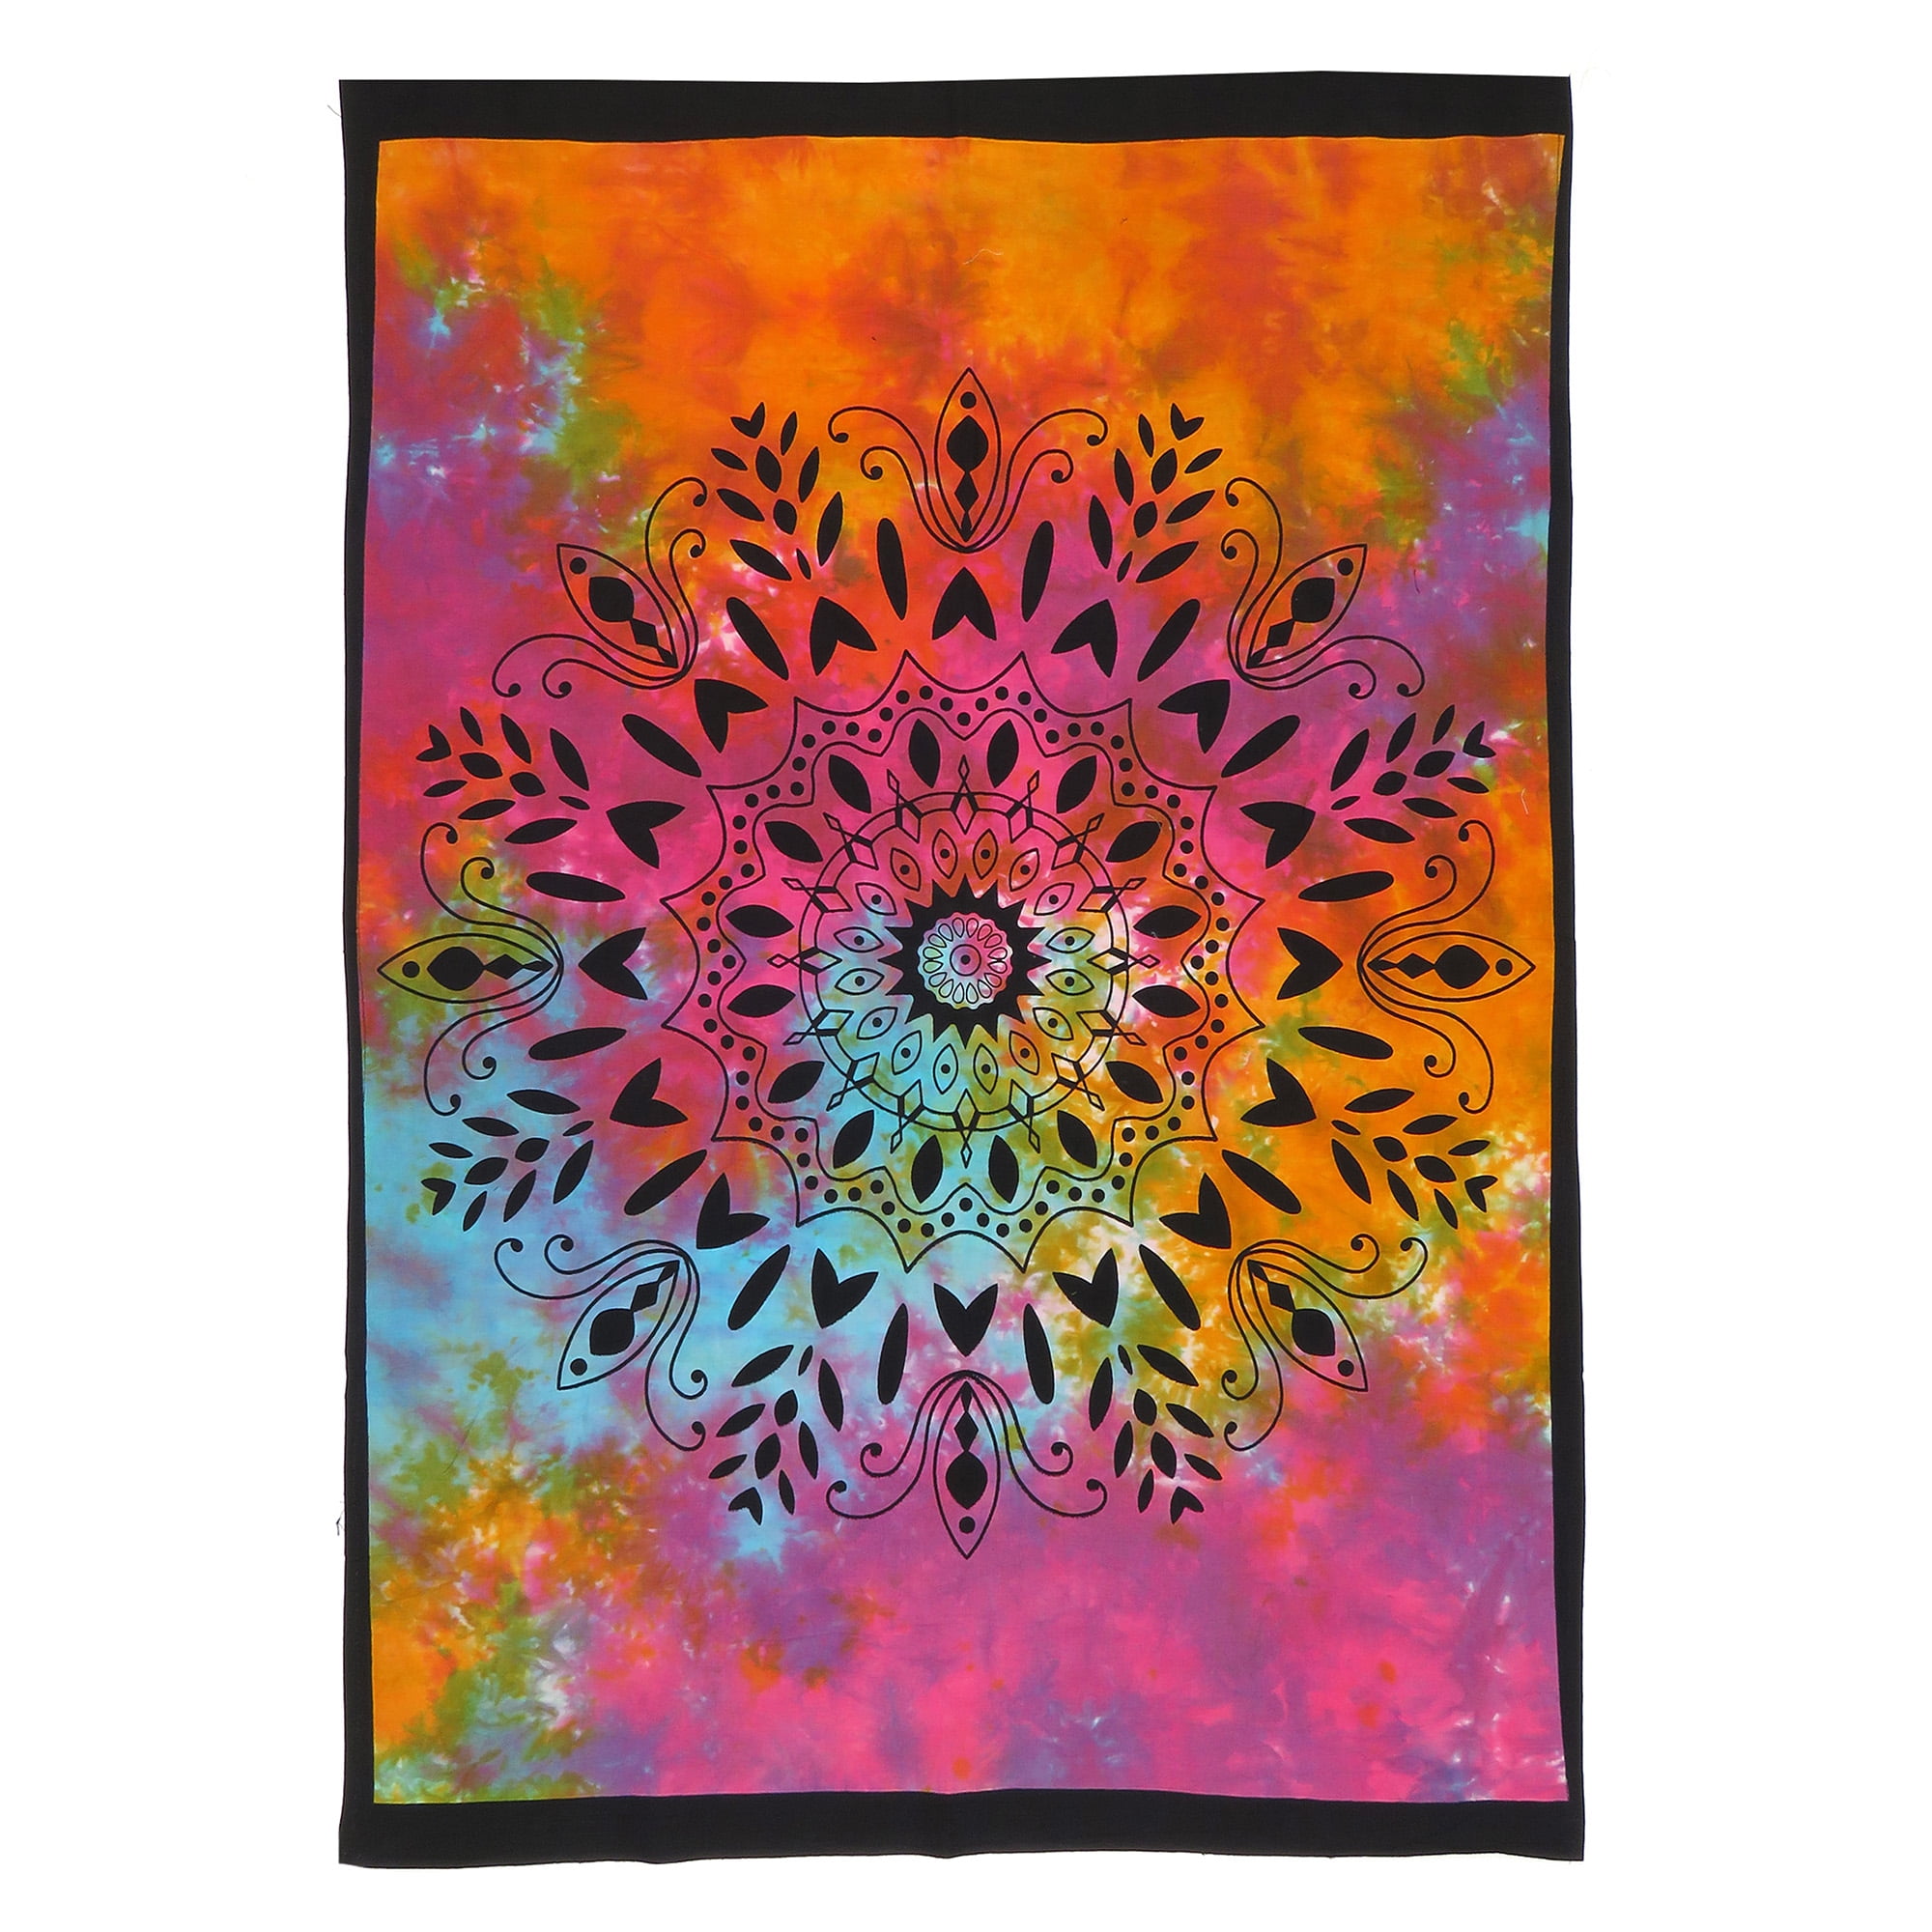 Fairy Art Poster Indian Mandala tapestry hippie wall hanging throw Tie Dye decor